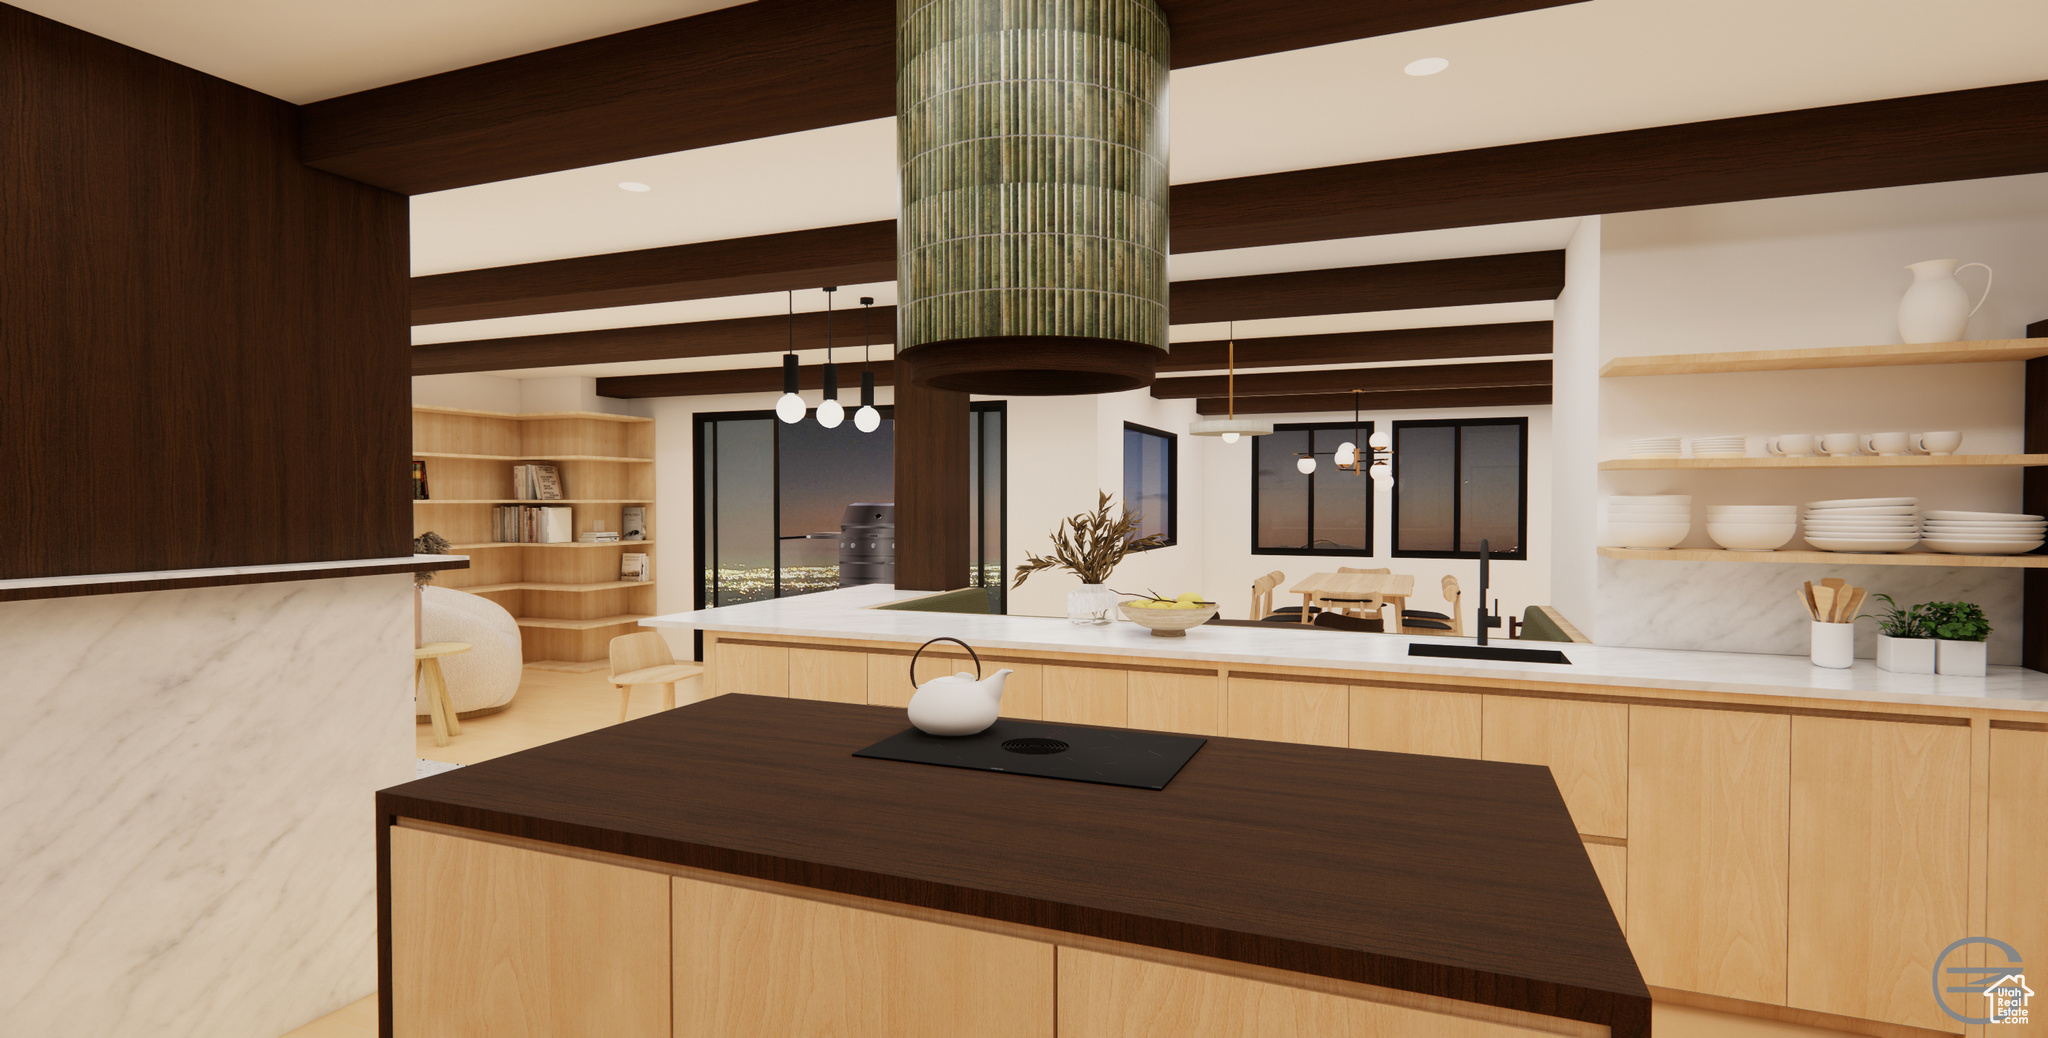 Kitchen with beam ceiling, light brown cabinets, sink, and decorative light fixtures - RENDERING